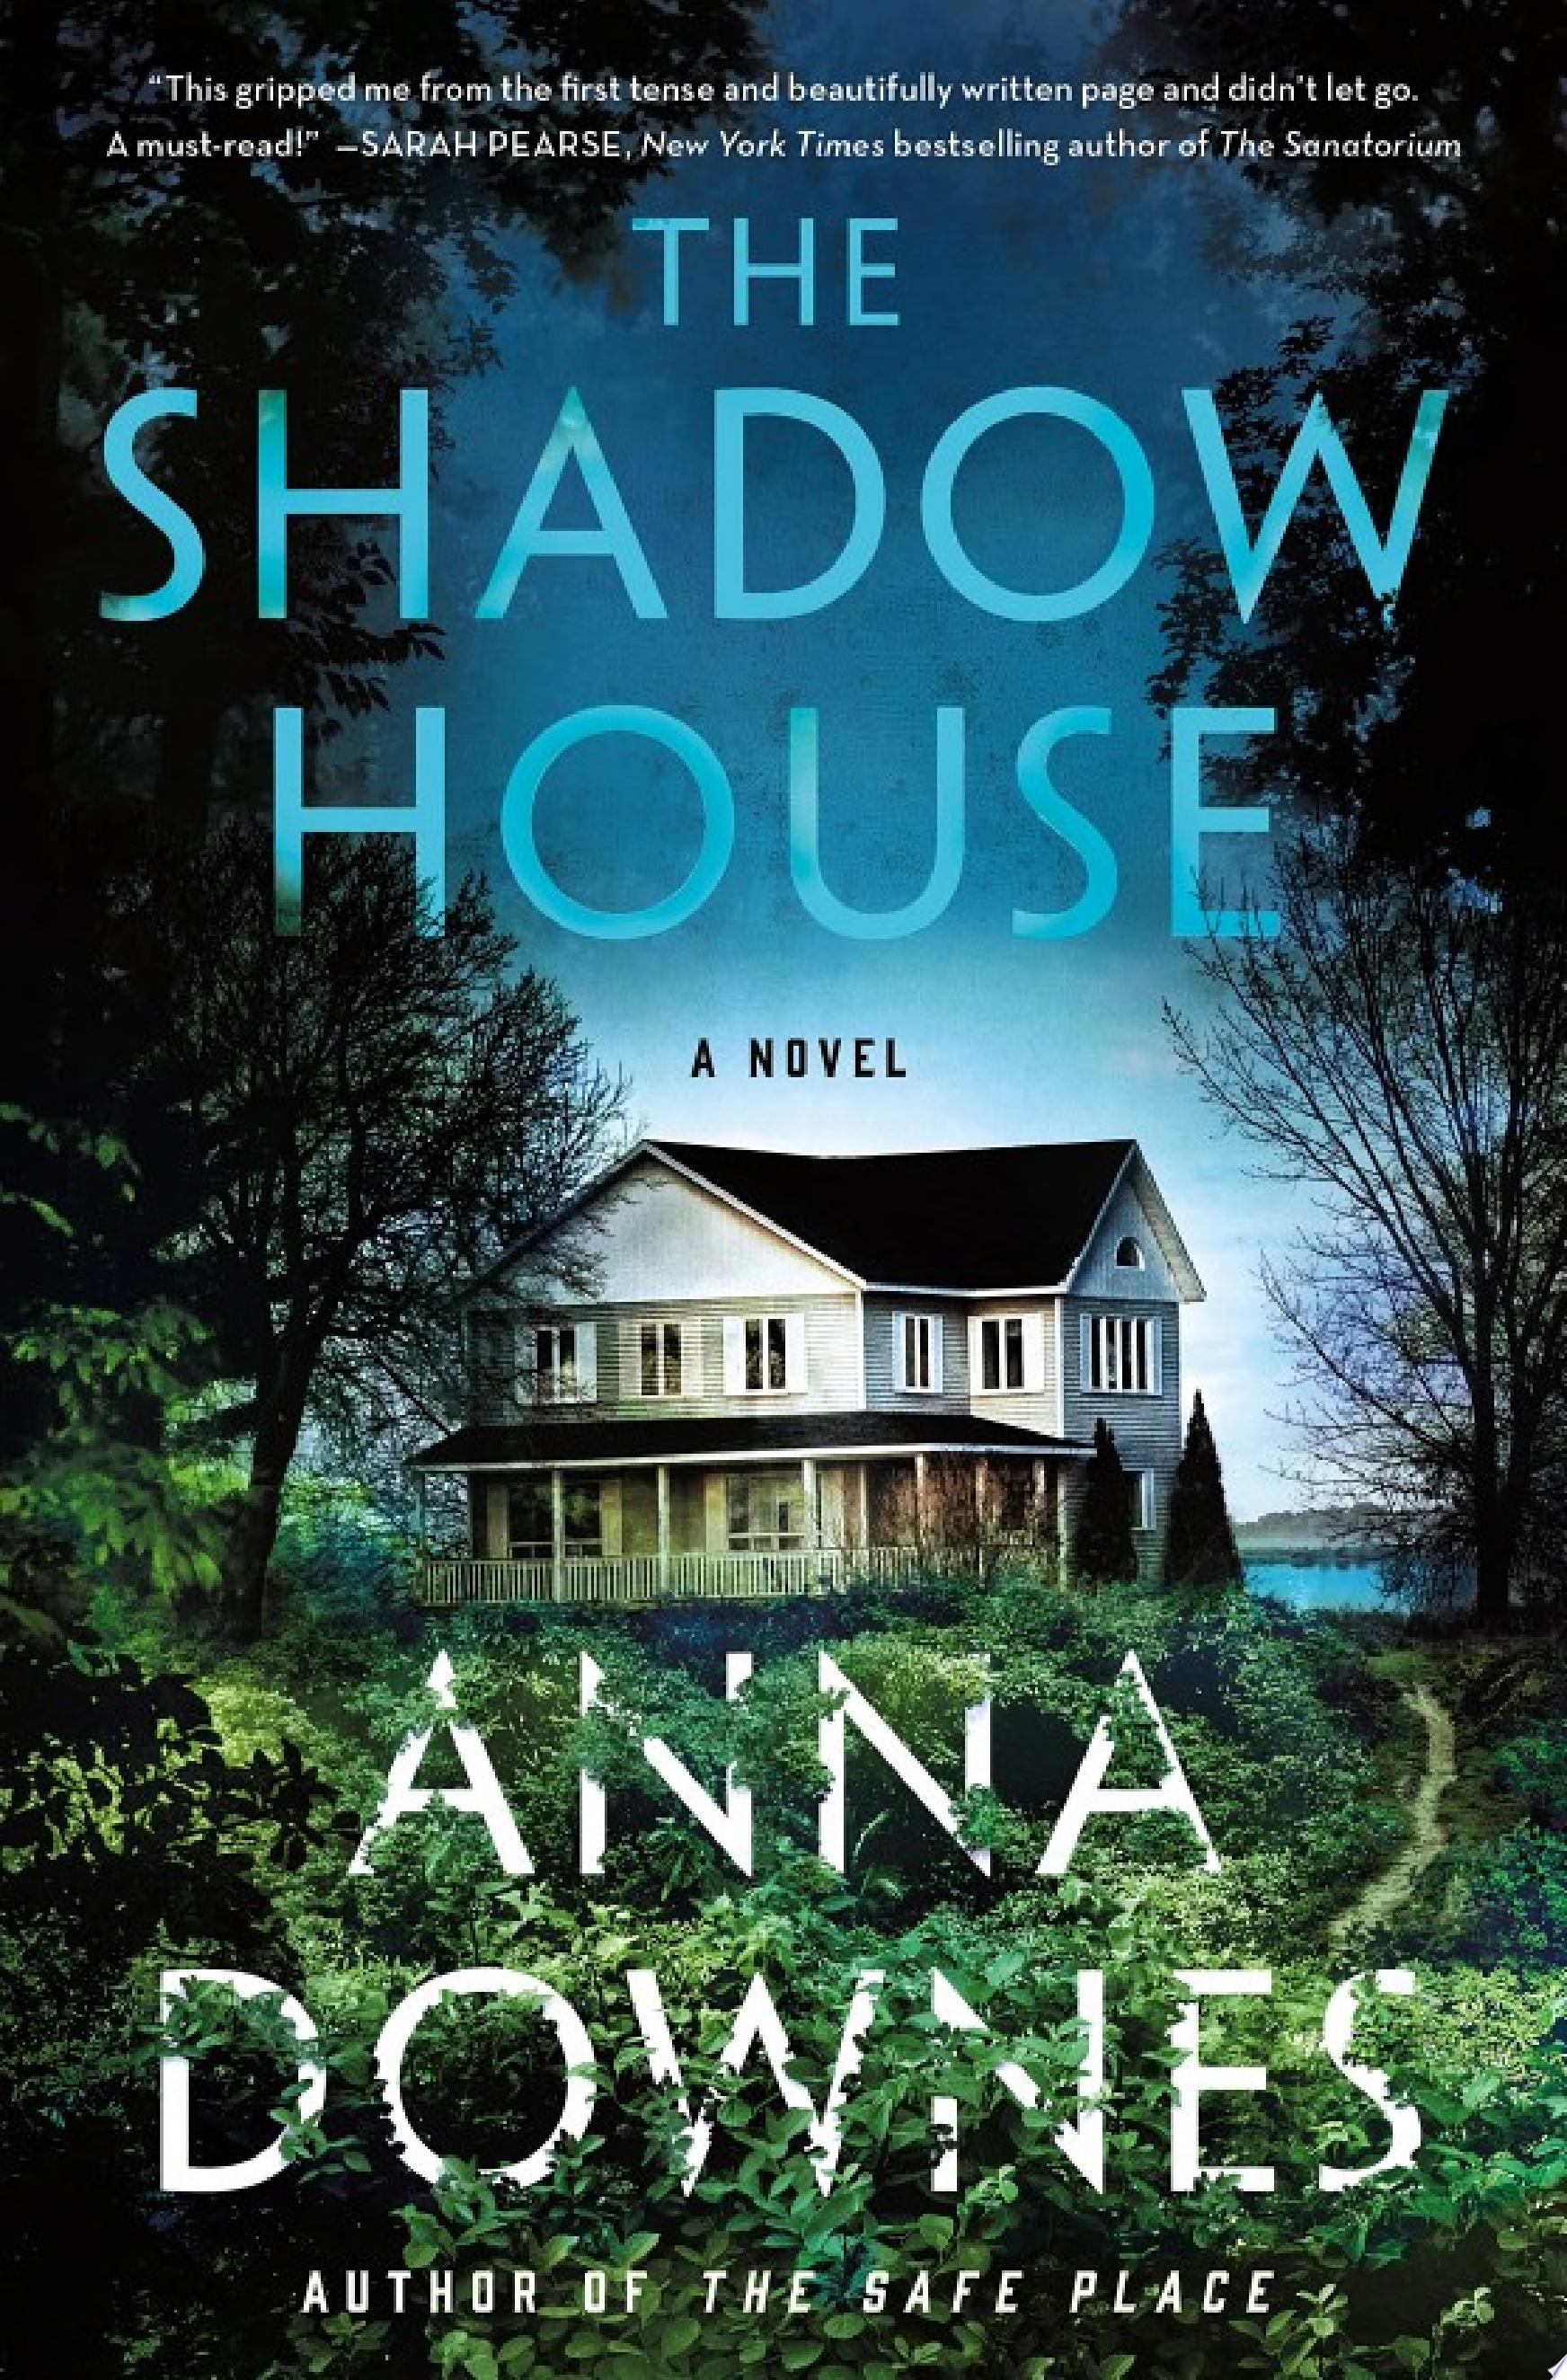 Image for "The Shadow House"